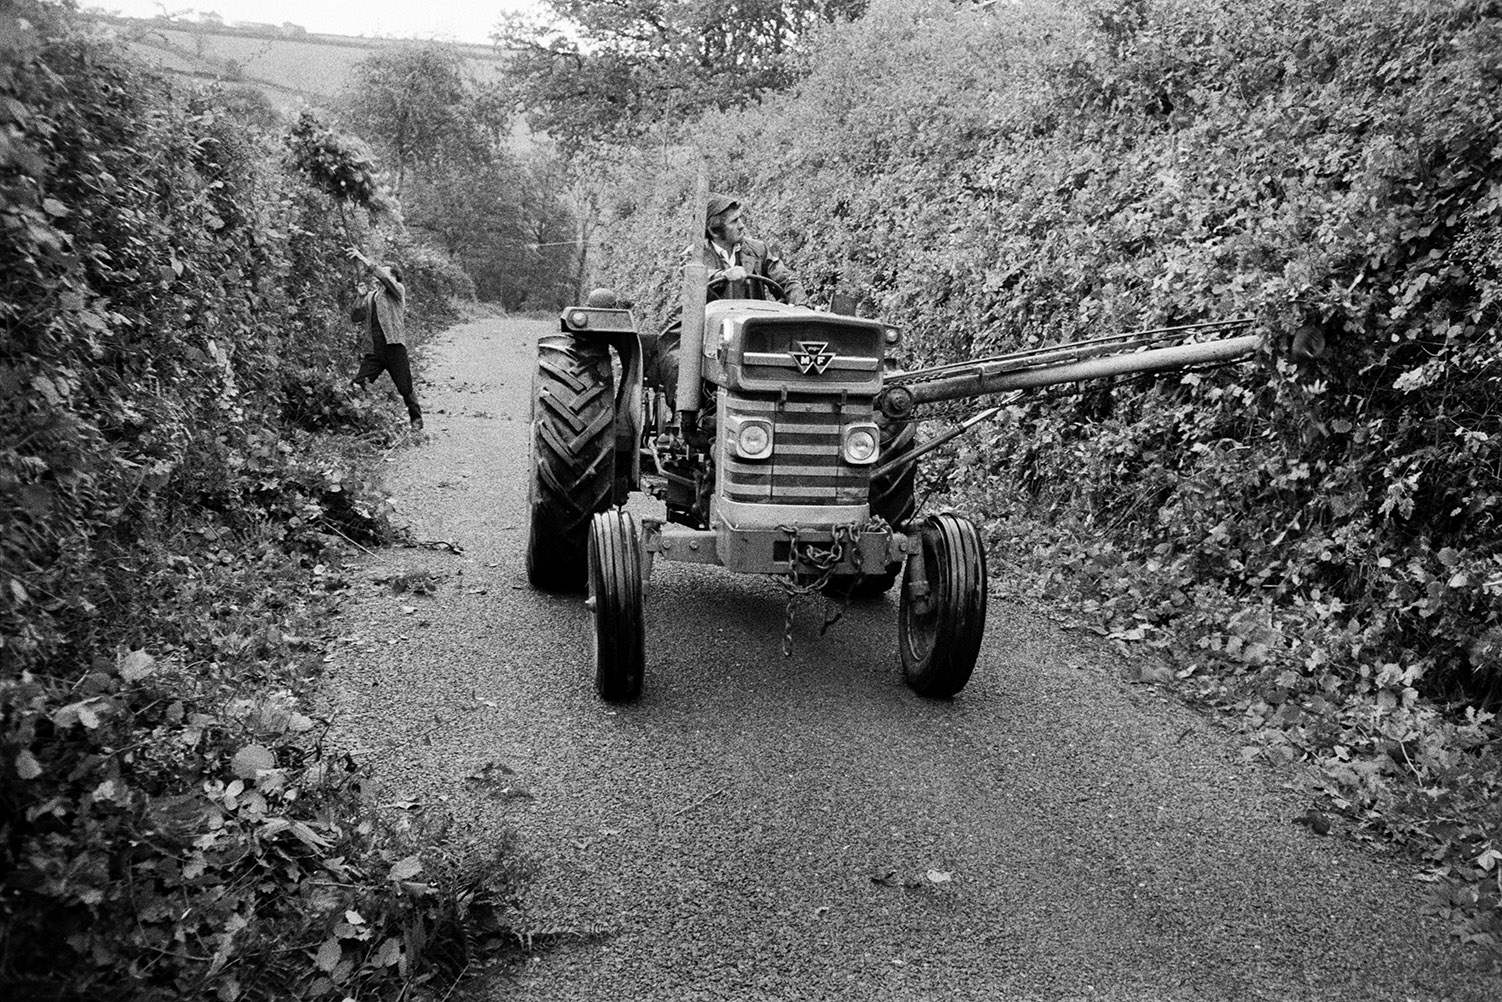 Two men cutting the hedge in a lane at Dolton, using a tractor and hedge cutter.